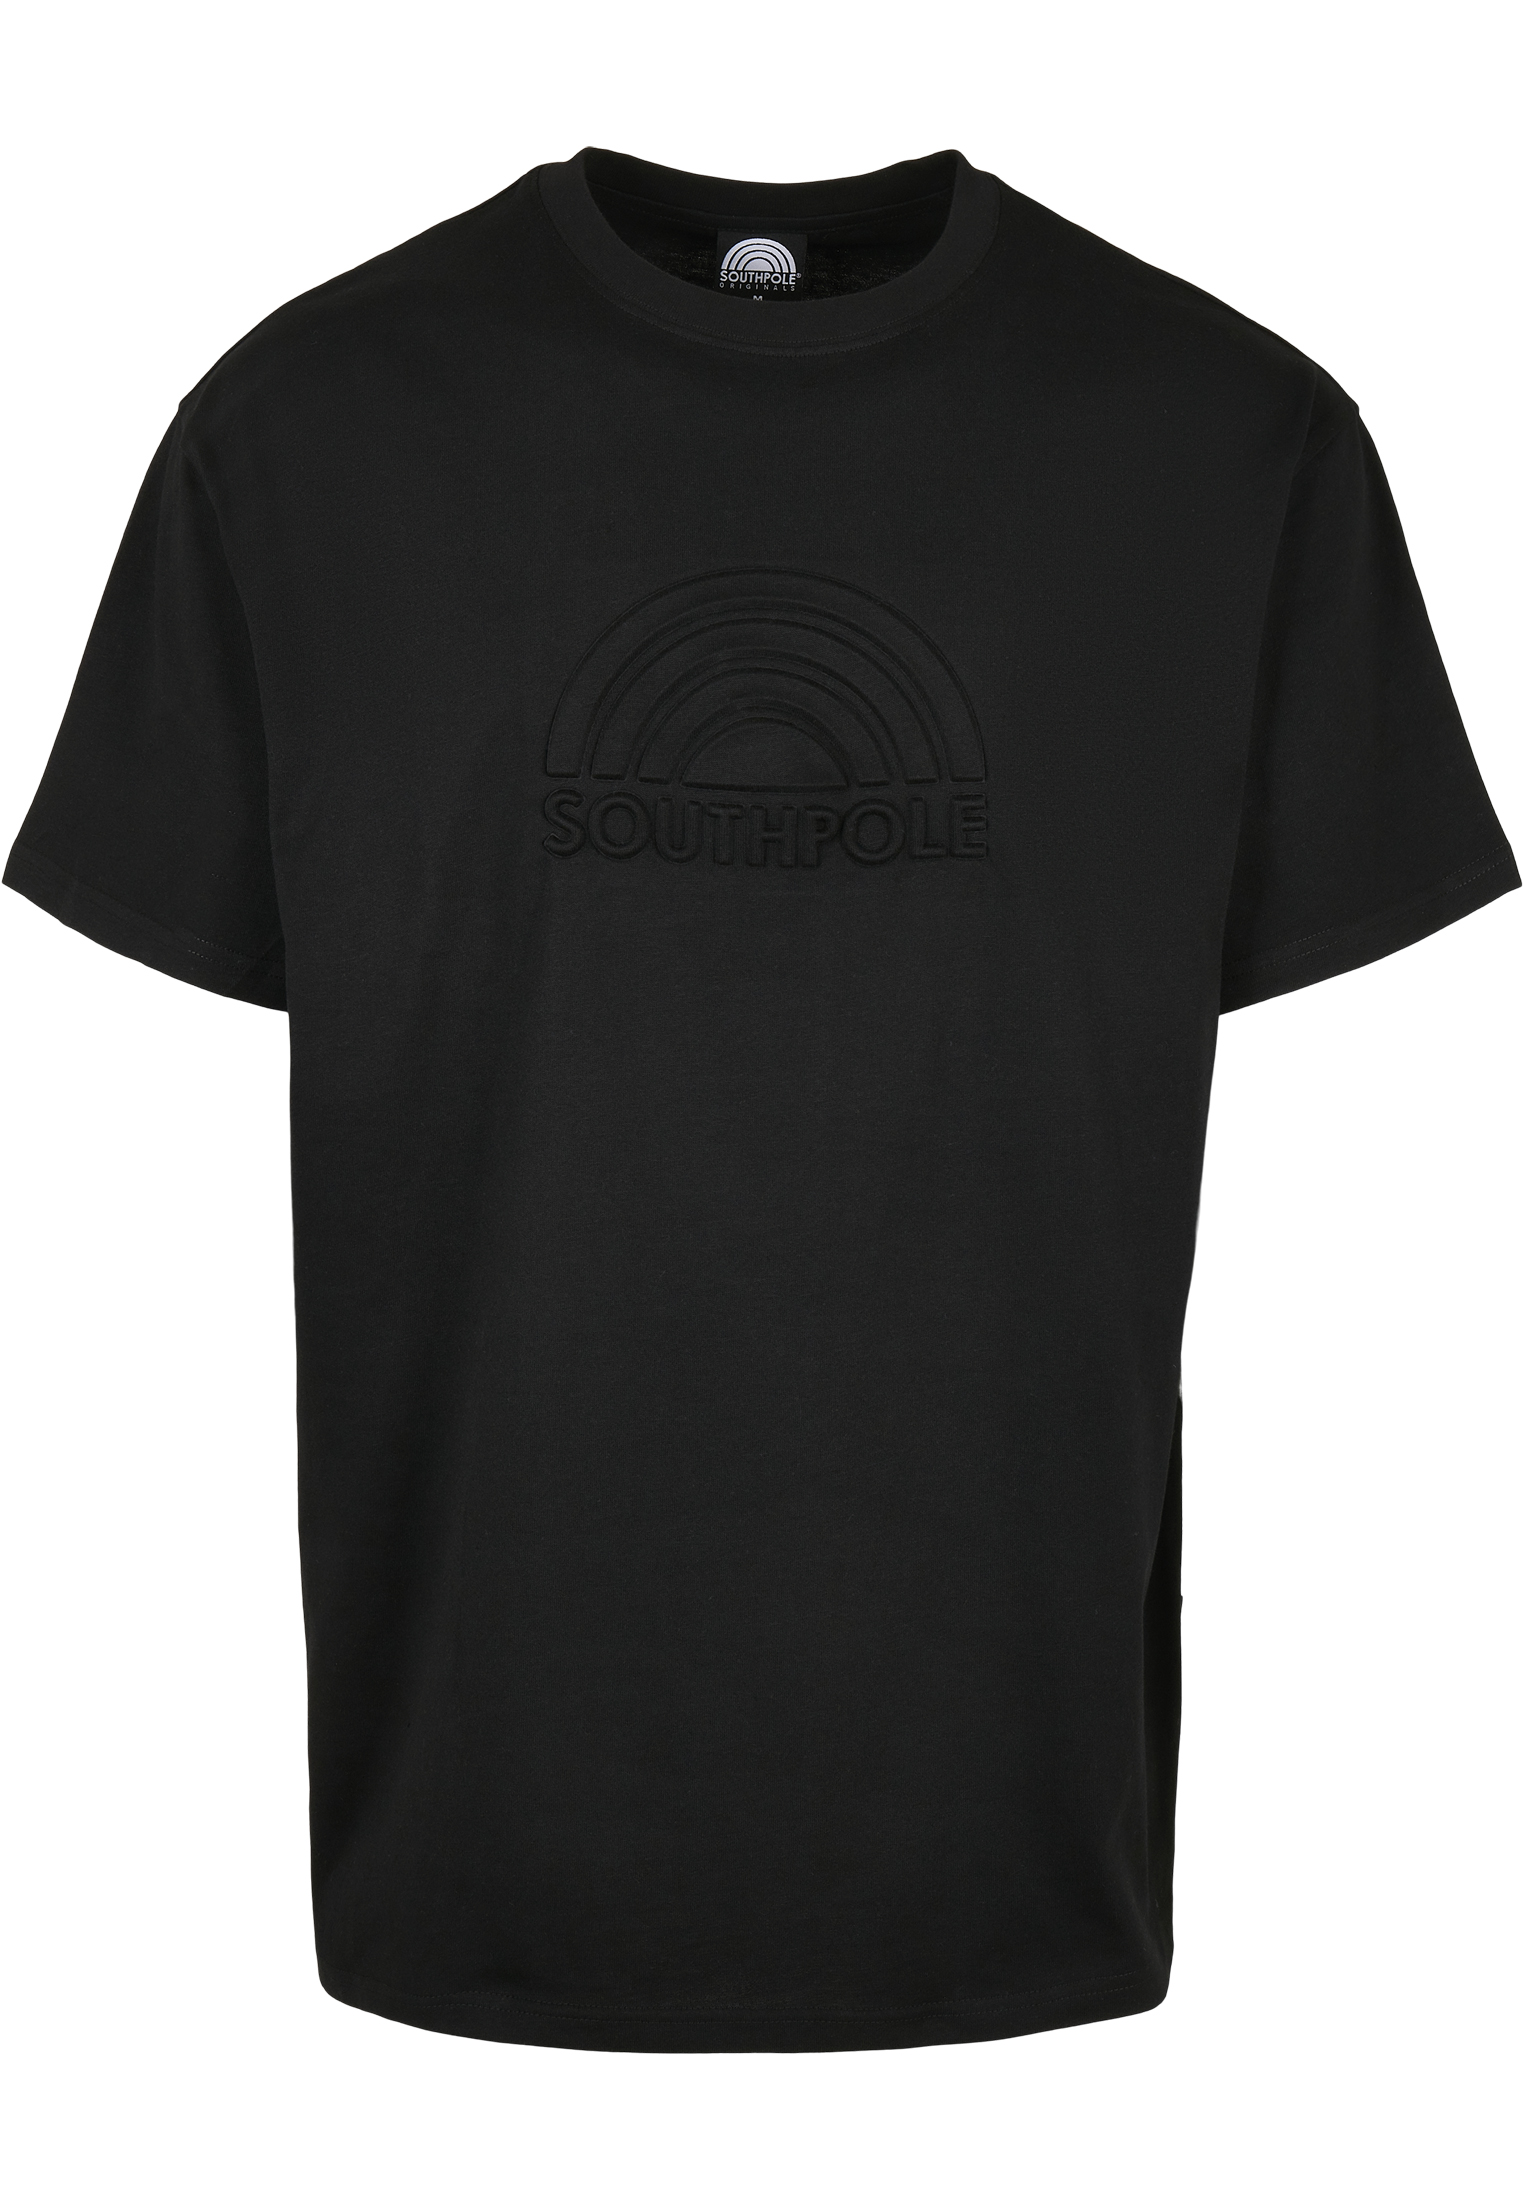 Nos Kollektion Southpole 3D Tee in Farbe black